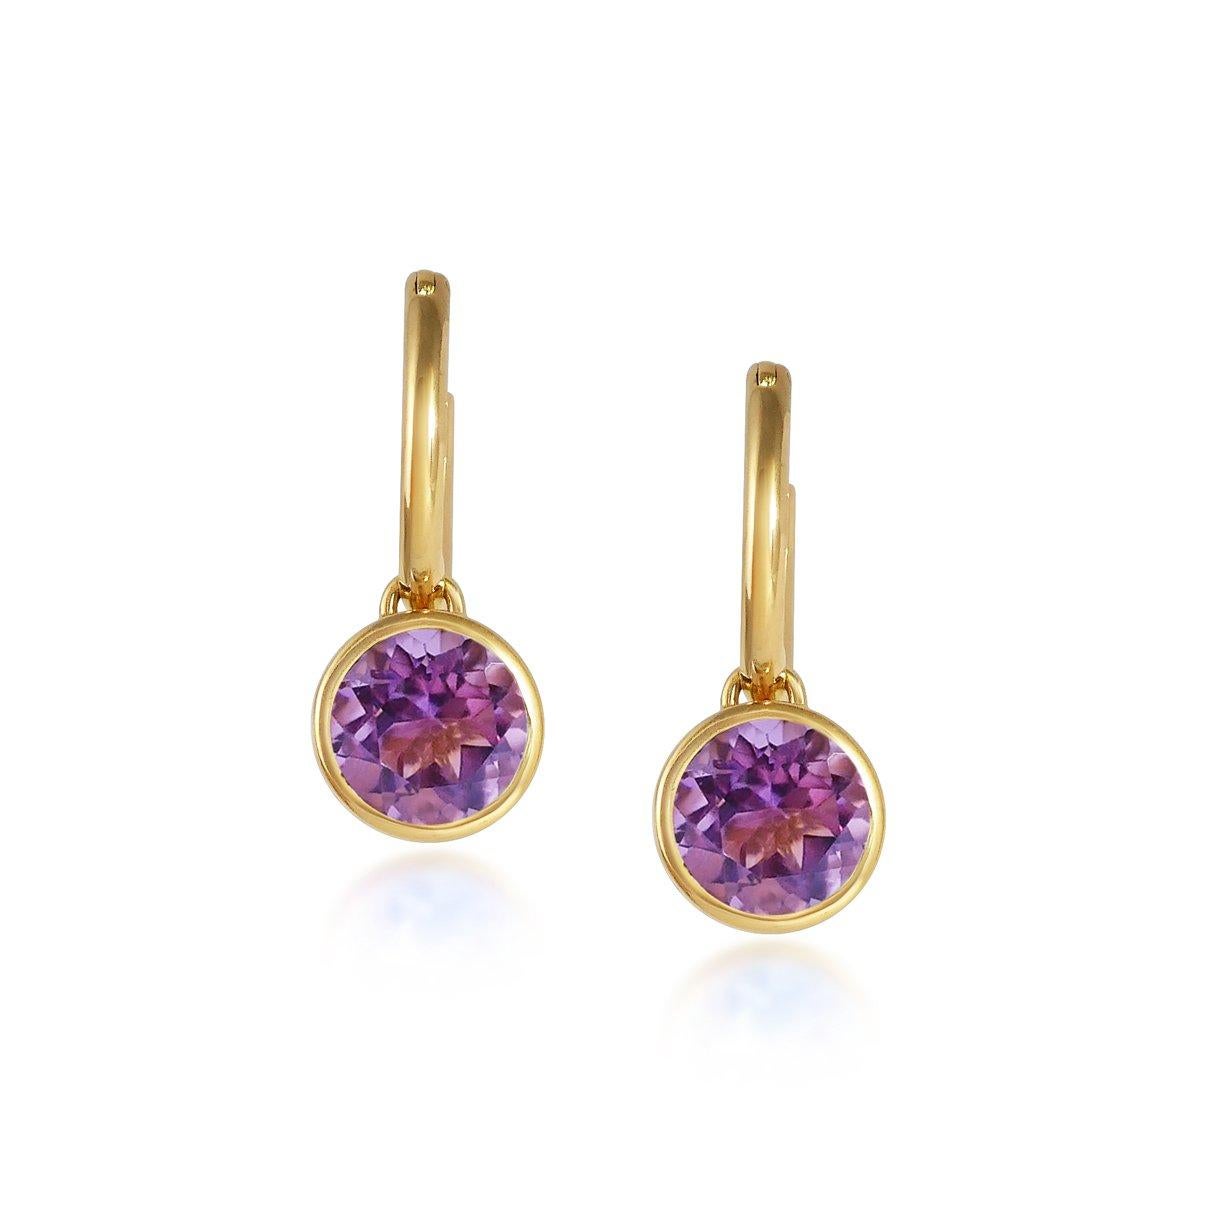 Round Cut Handcrafted 2.40 Carats Amethyst 18 Karat Yellow Gold Drop Earrings For Sale